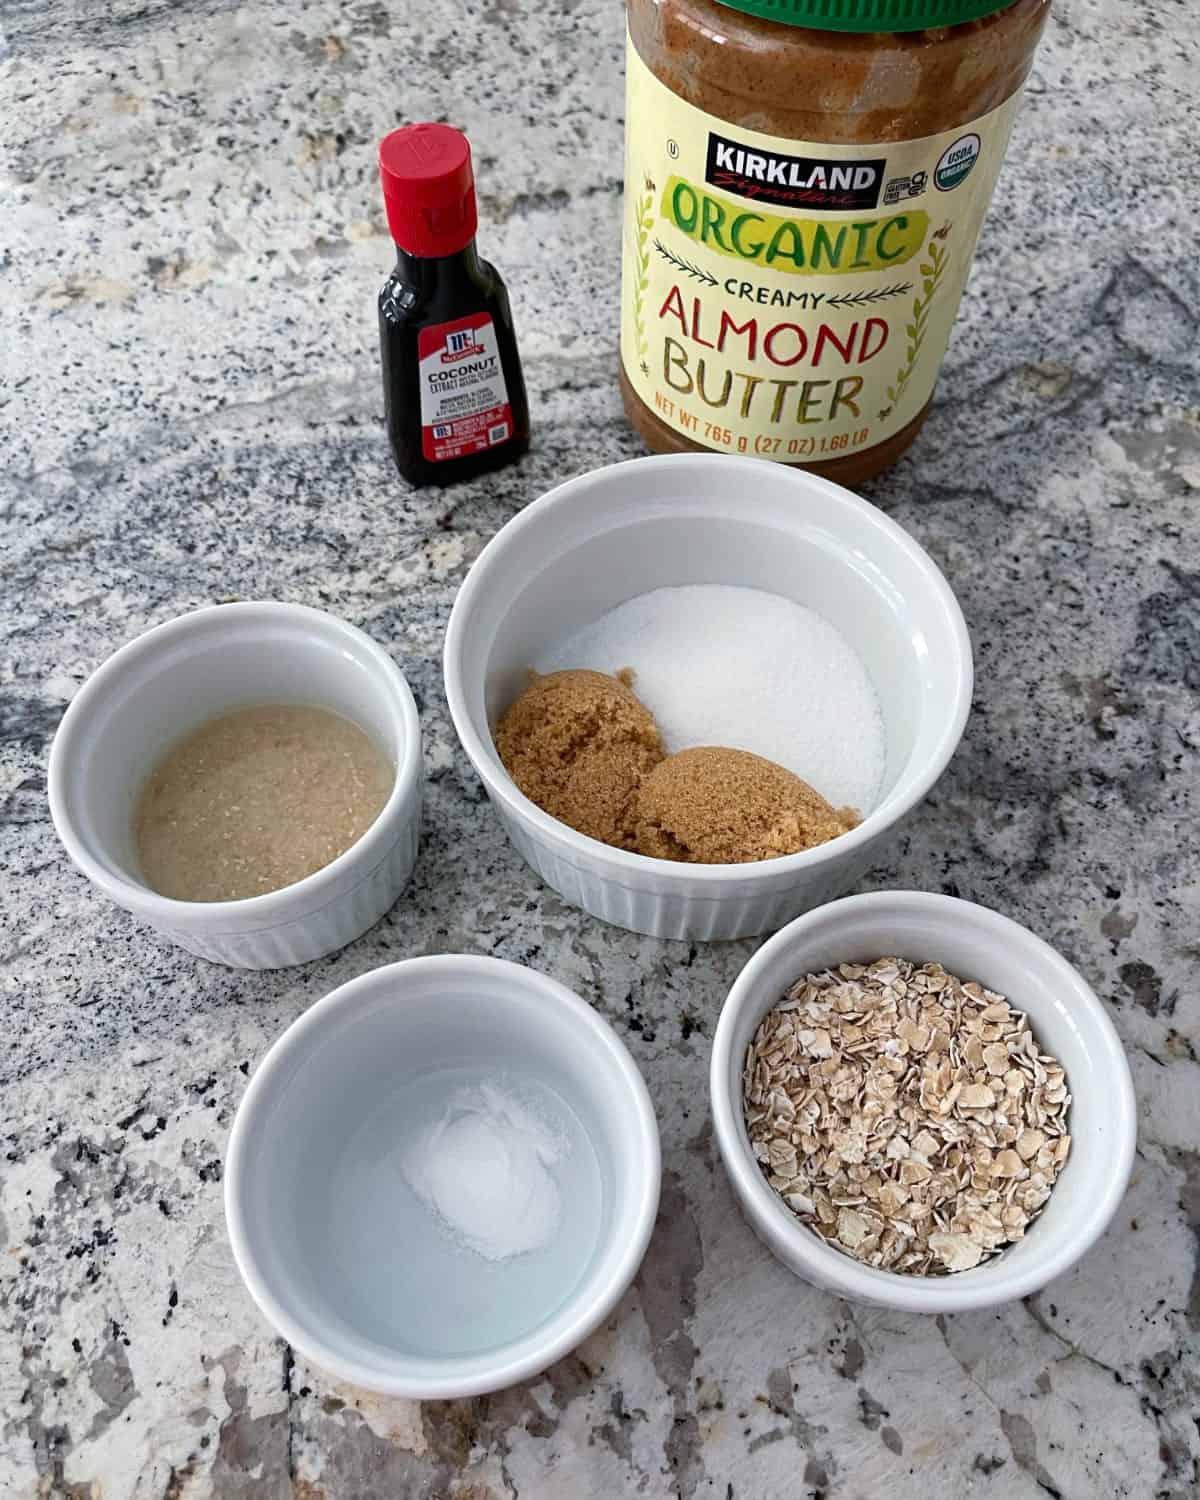 Ingredients including creamy almond butter, coconut extract, rolled oats, baking soda, Truvia Baking Blend and ground flax seeds.